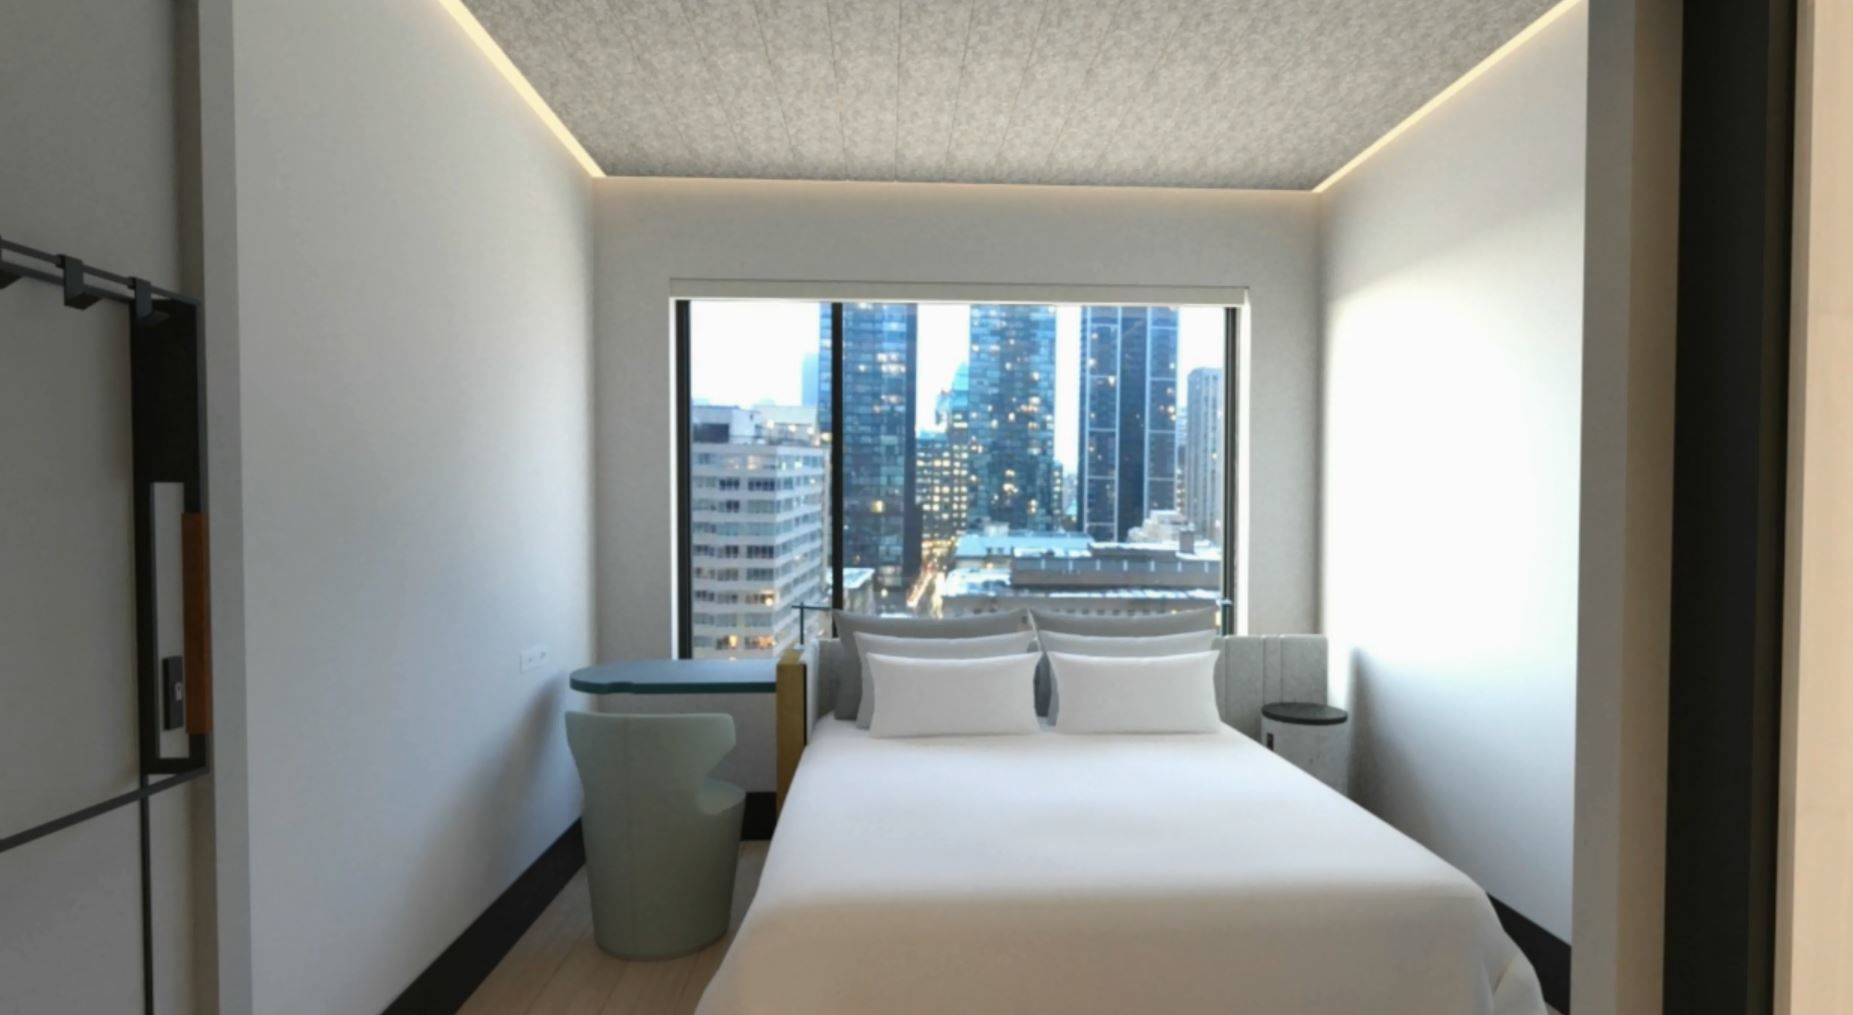 Guest rooms at Motto will average just 163 square feet, but will include space-saving features like wall-beds, loft beds, segmented shower and toilet stalled and multi-functional furniture that can be stowed away when not in use. (Courtesy Hilton)